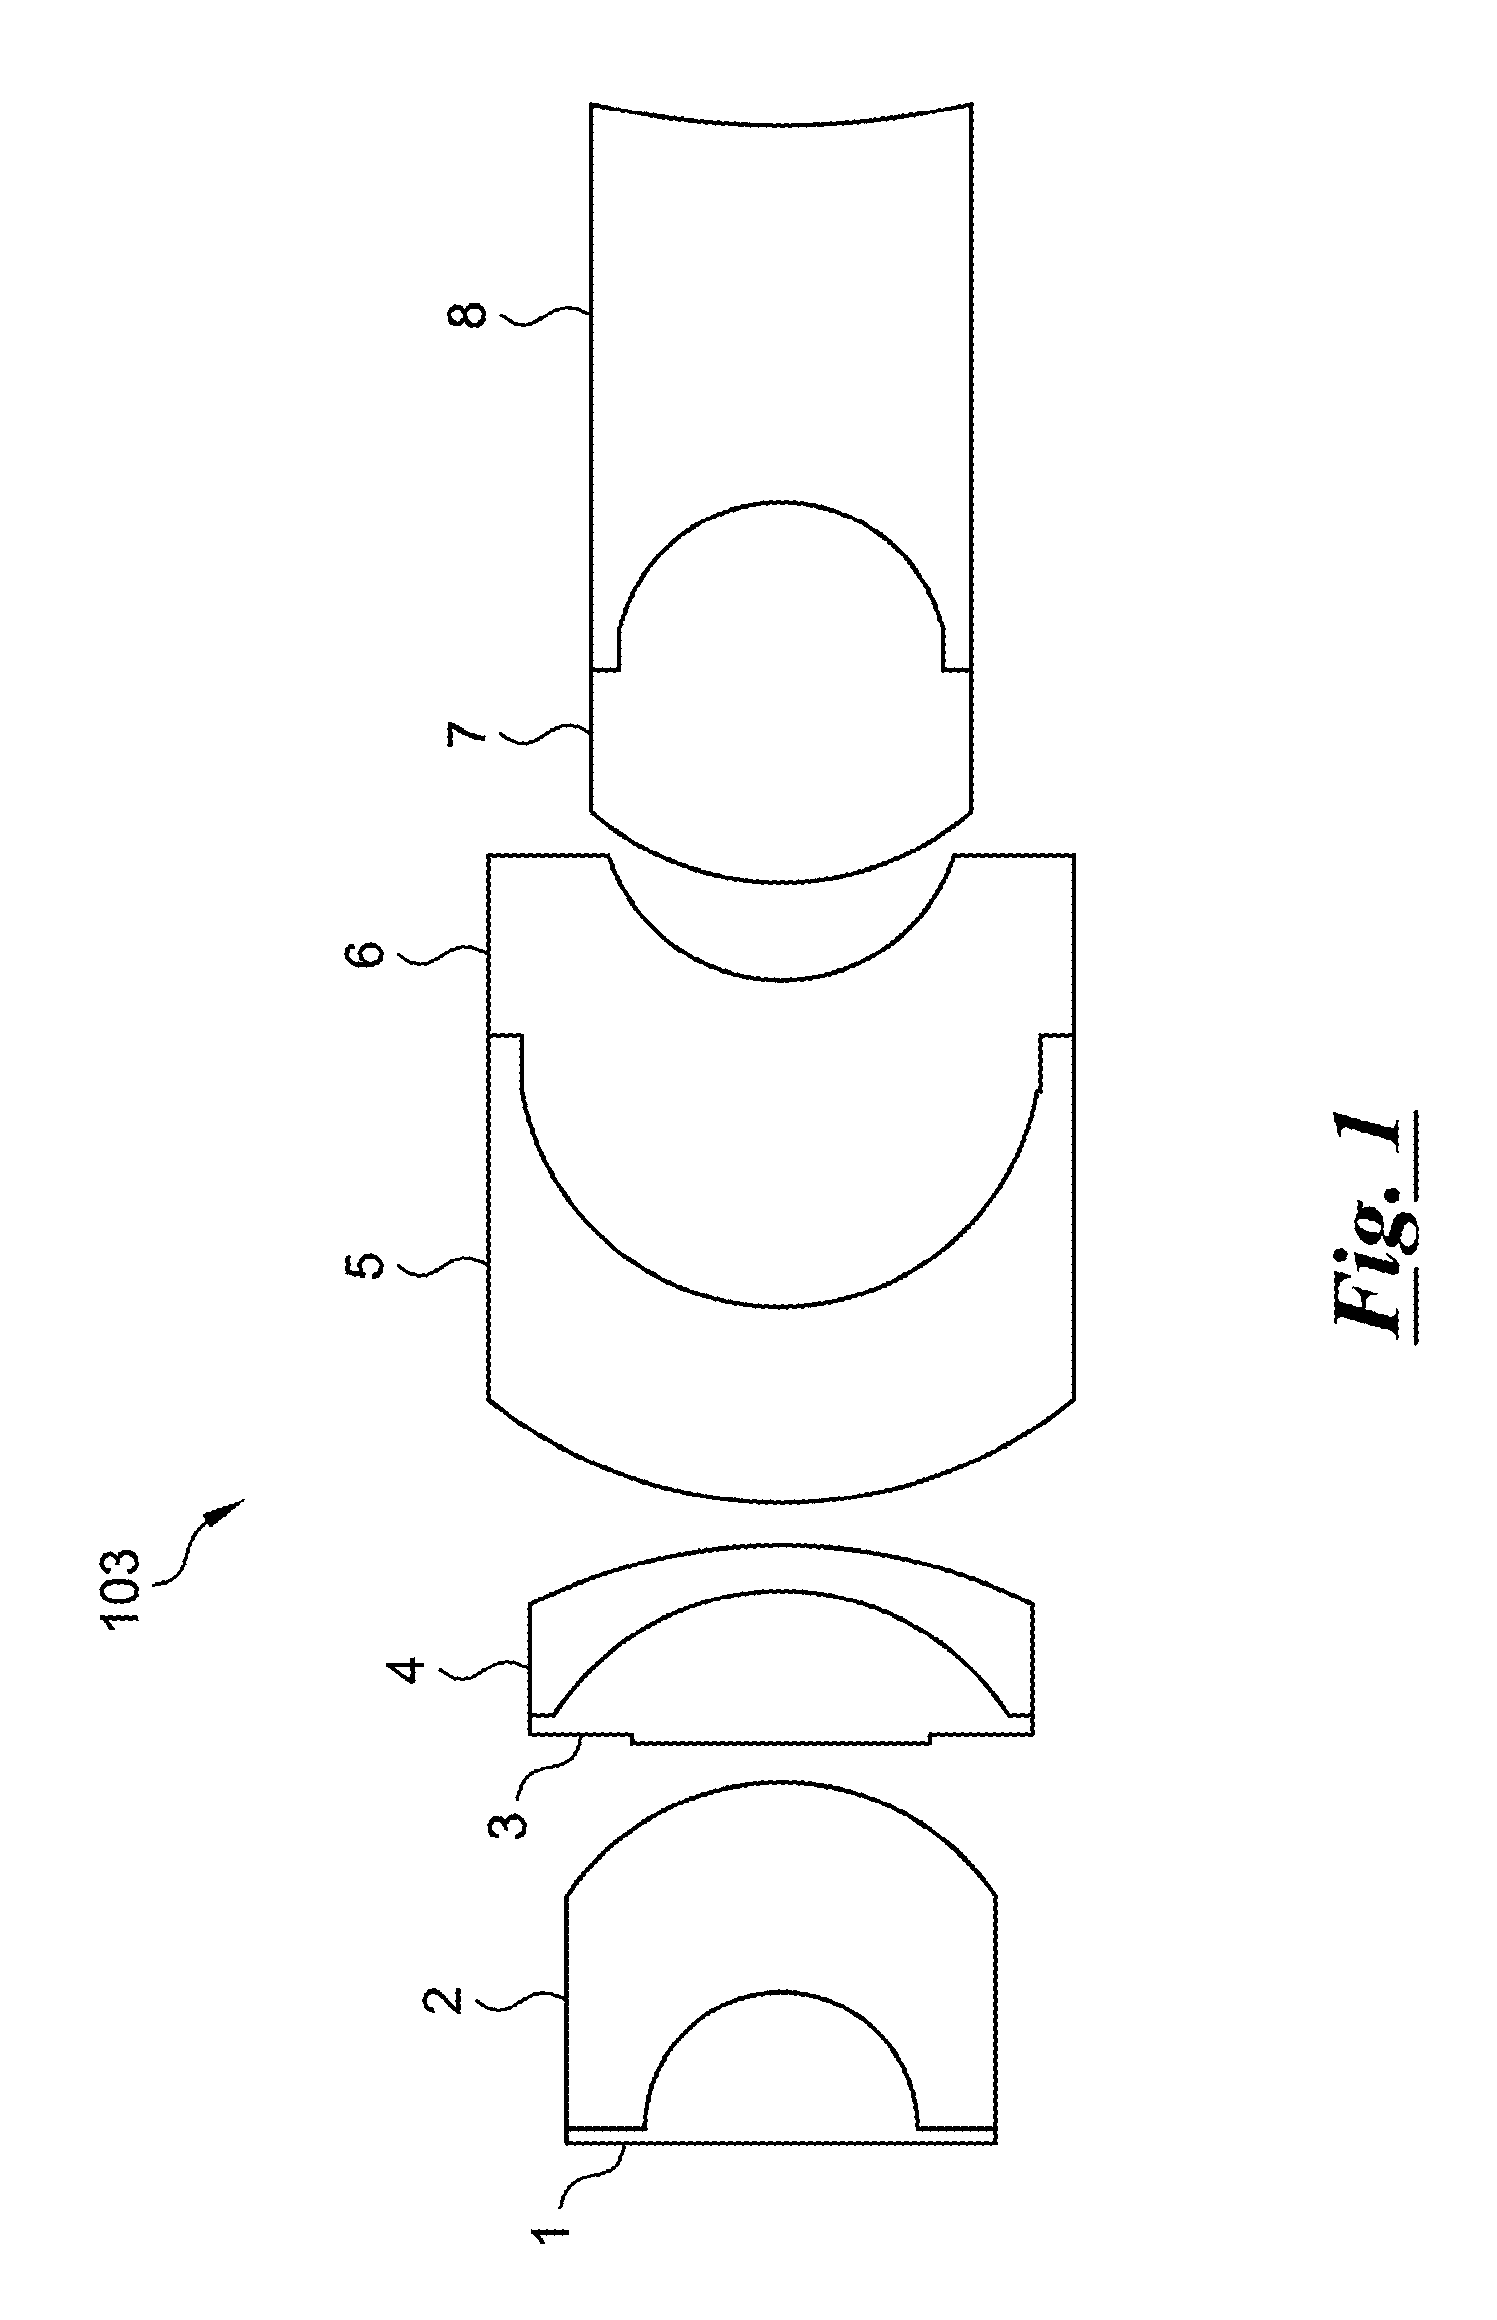 Depth of field extension for optical tomography